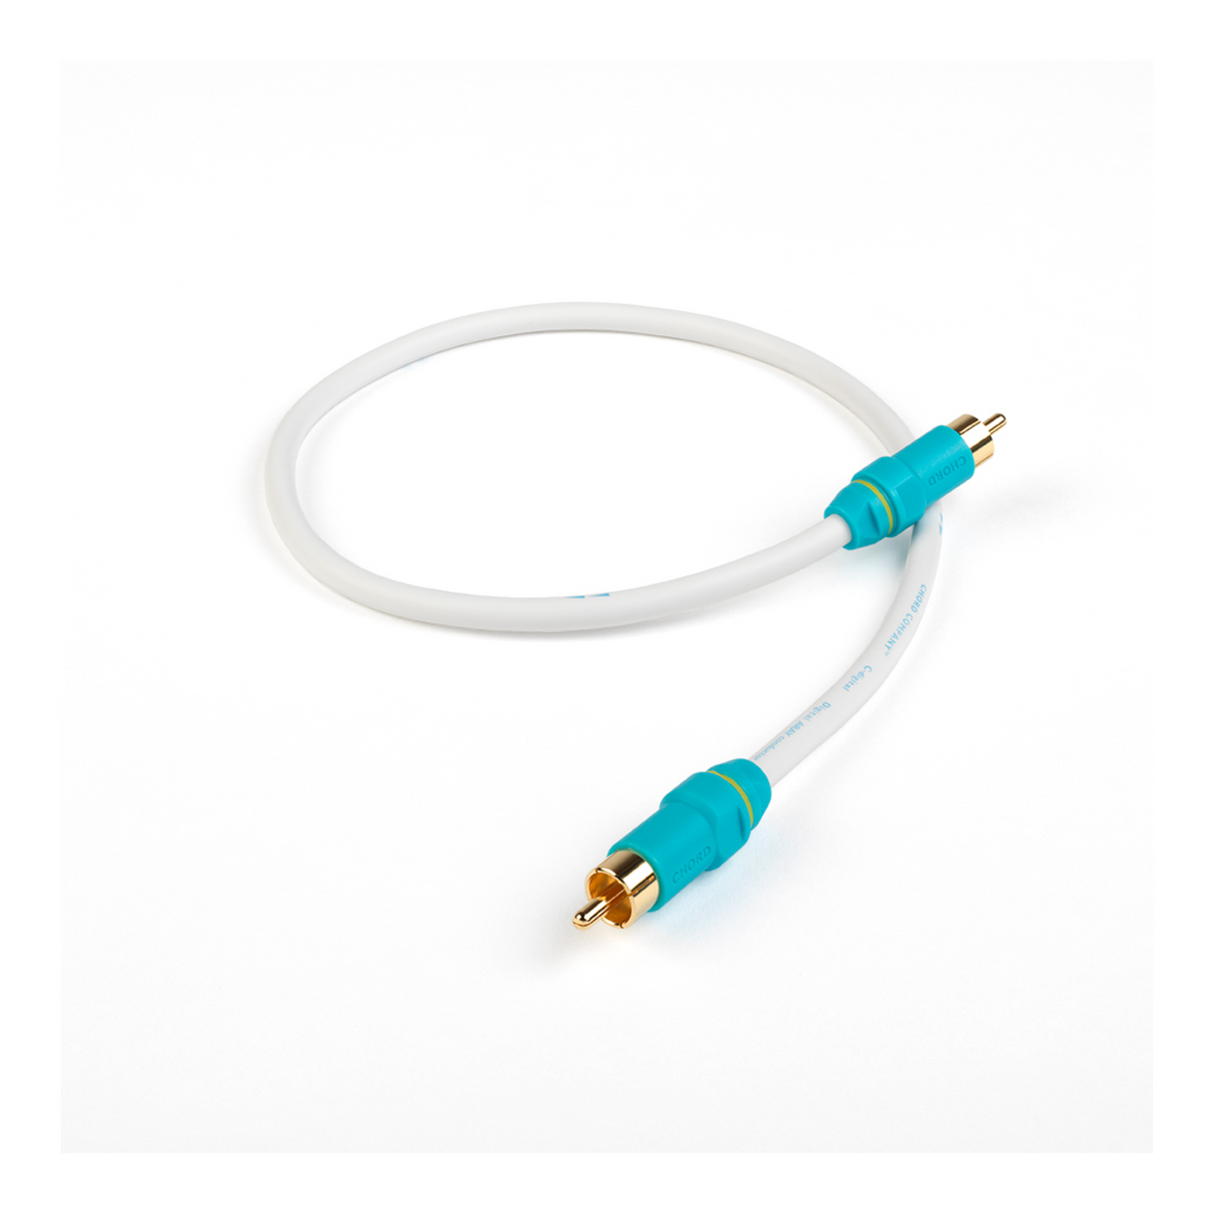 Chord C-Digital Coaxial Cable -0.5 metre